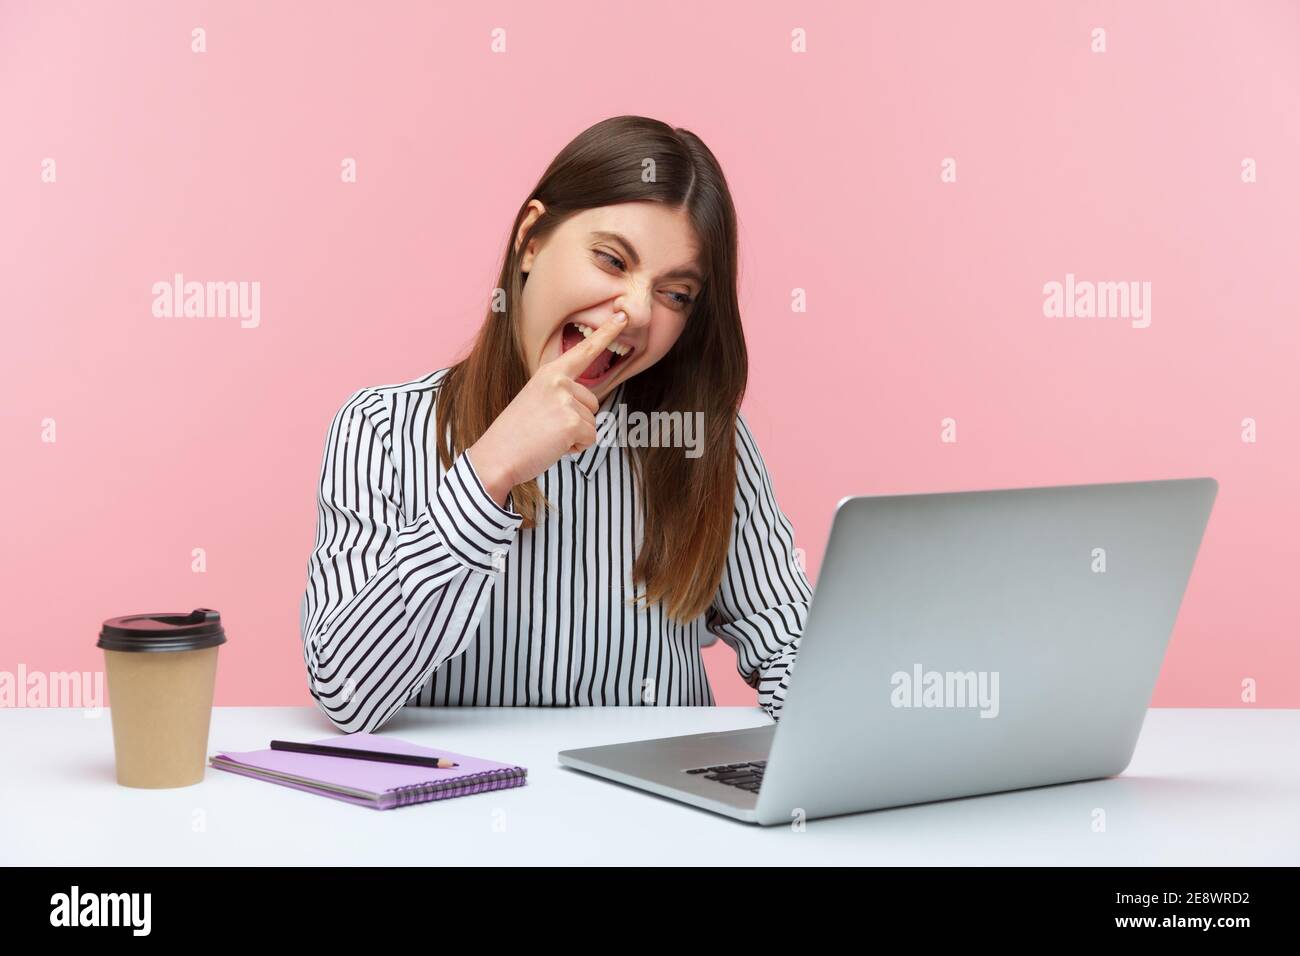 Lazy woman office worker having fun picking nose and looking into laptop screen with careless expression, talking on video call at workplace. Indoor s Stock Photo